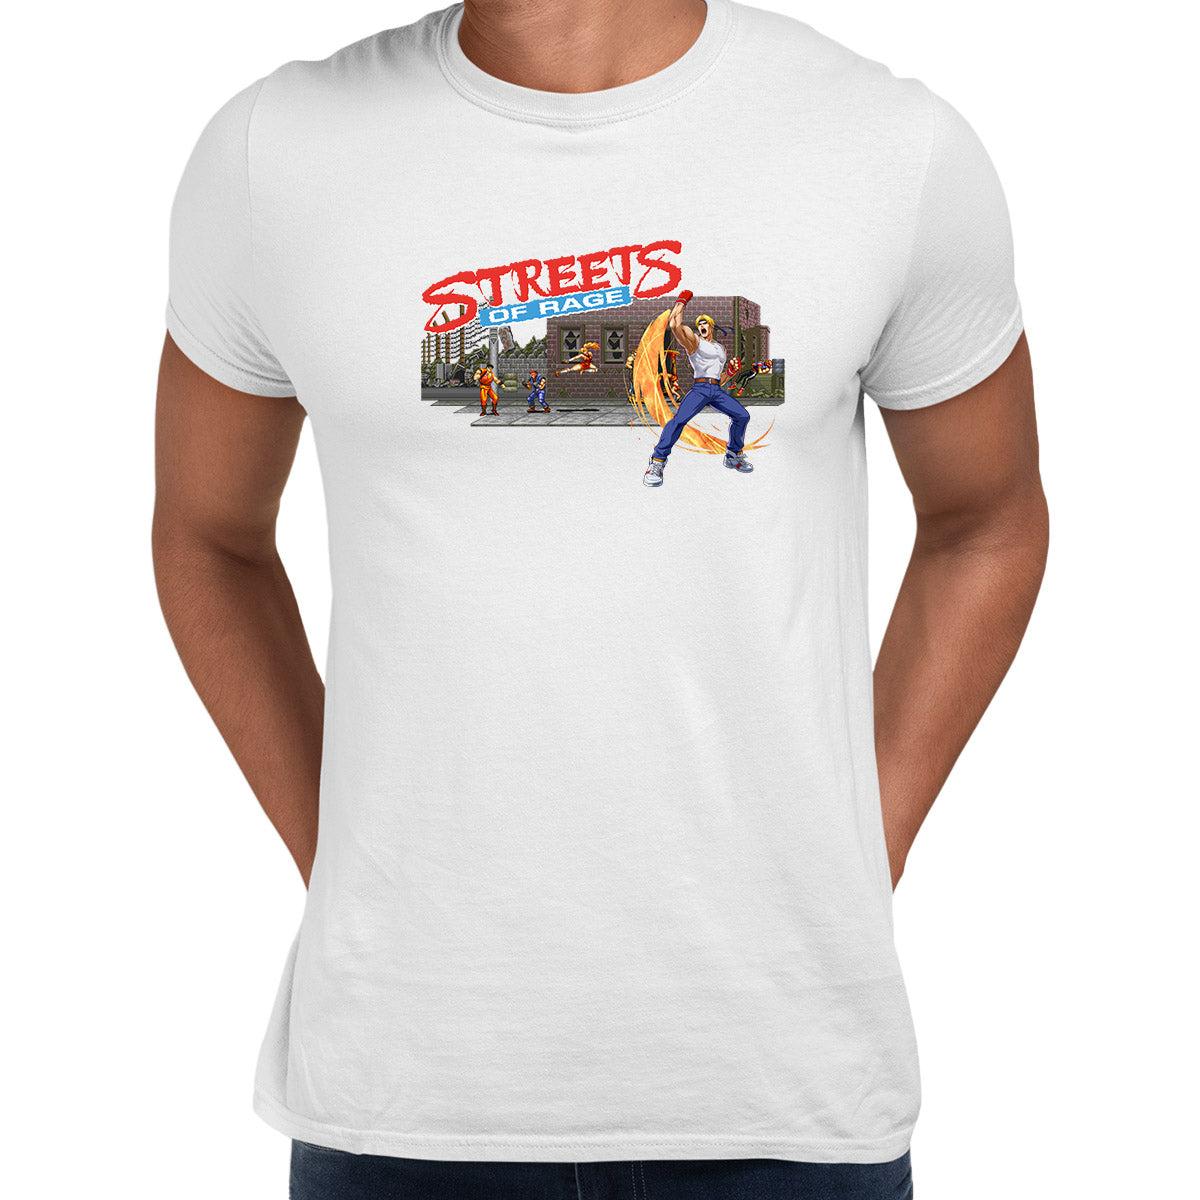 Streets of Rage 3 White T-shirt